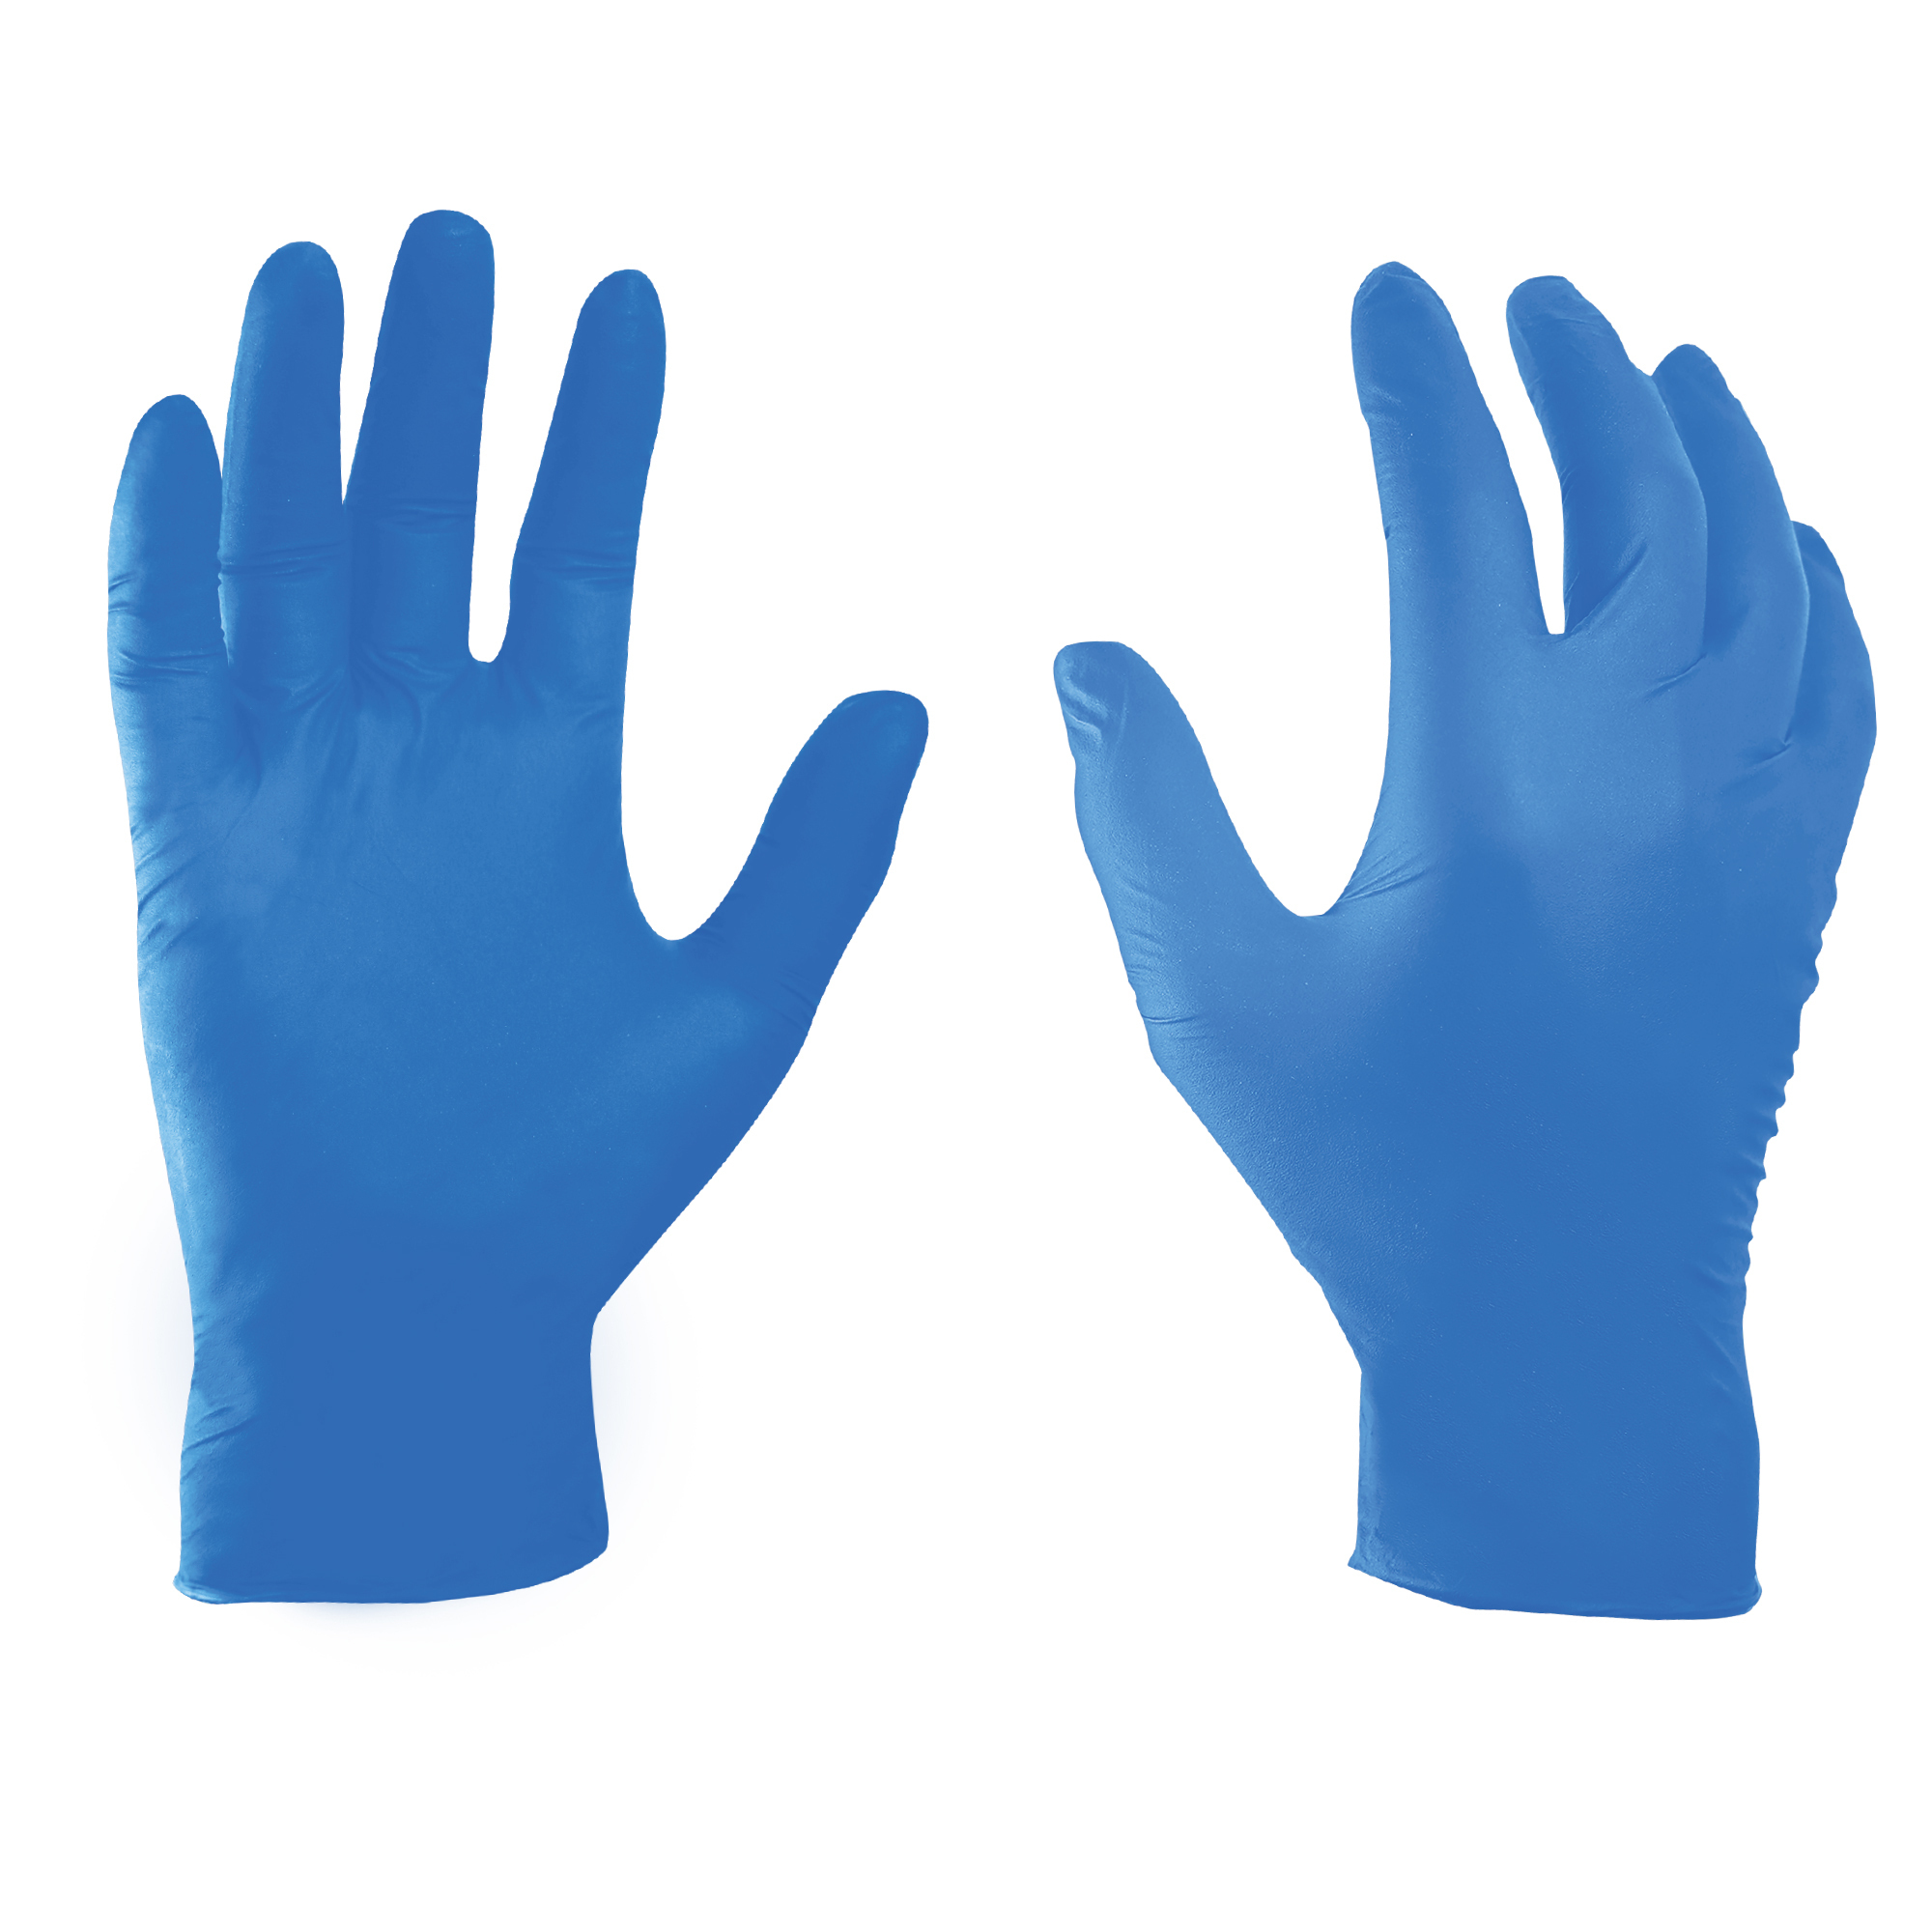 General Electric, 4mil Nitrile Blue Small Gloves 100pk, Size S, Color Blue, Included (qty.) 100 Model GG600S